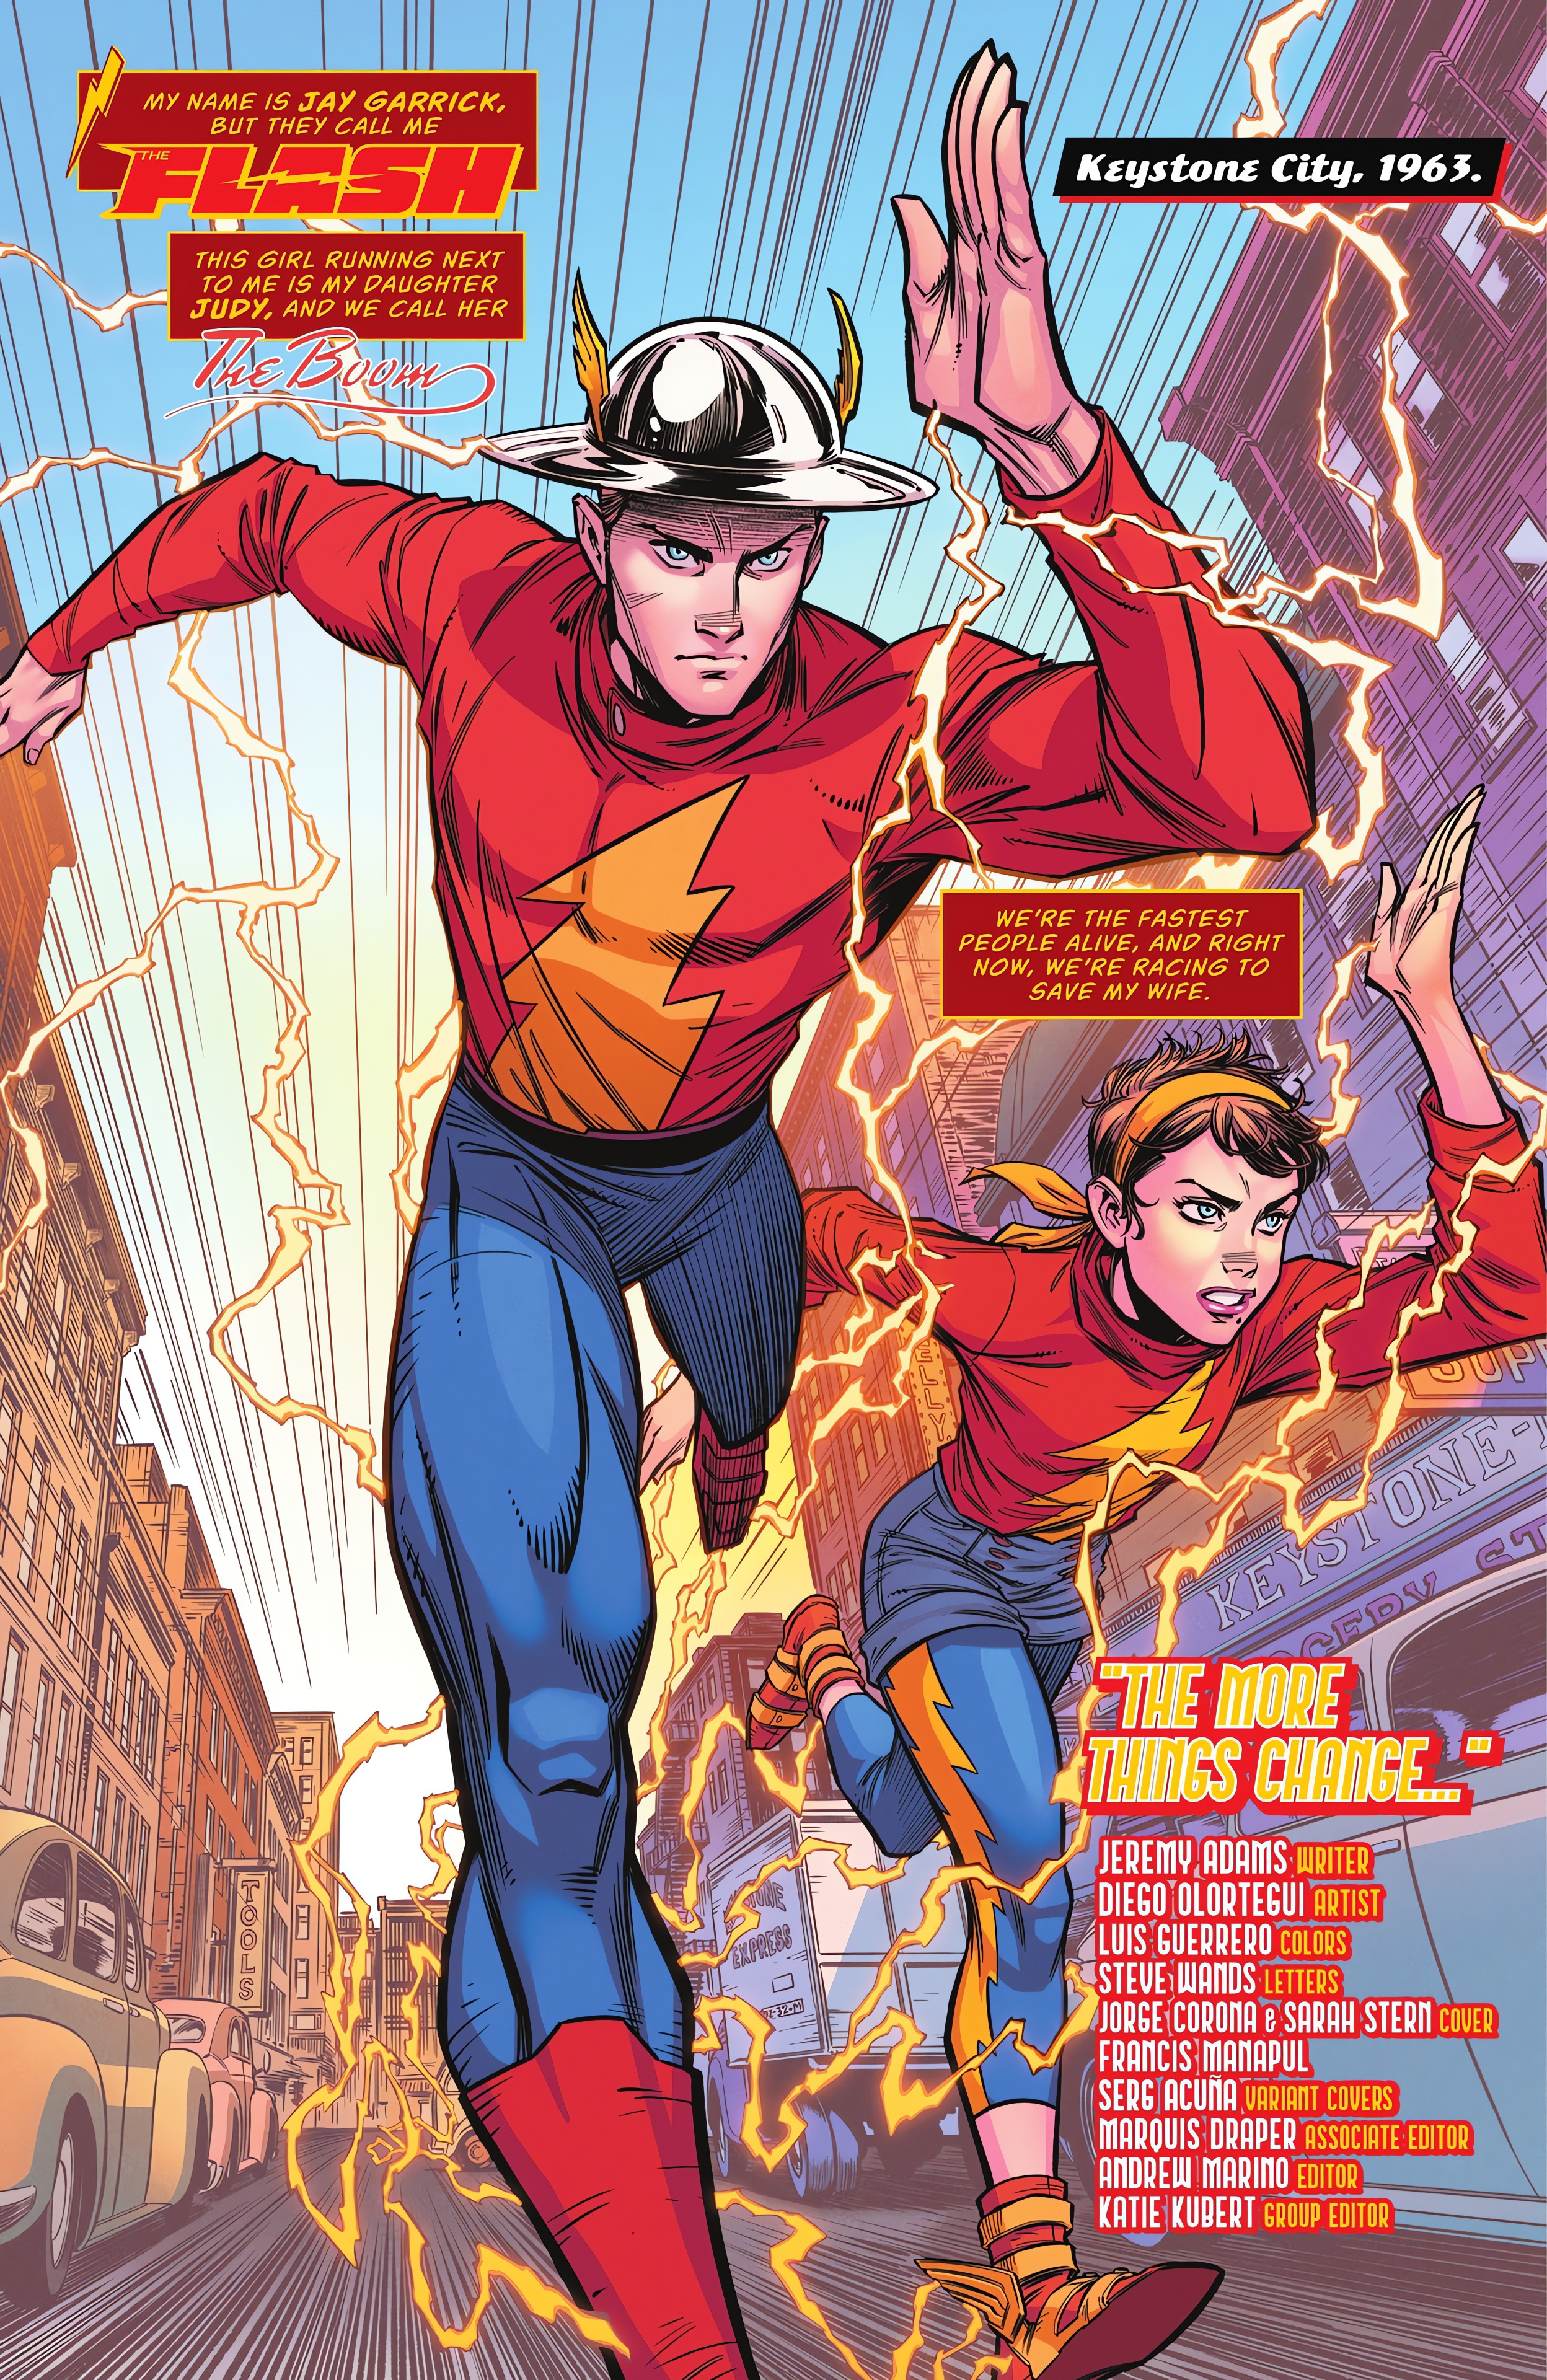 Read online Jay Garrick: The Flash comic -  Issue #1 - 3